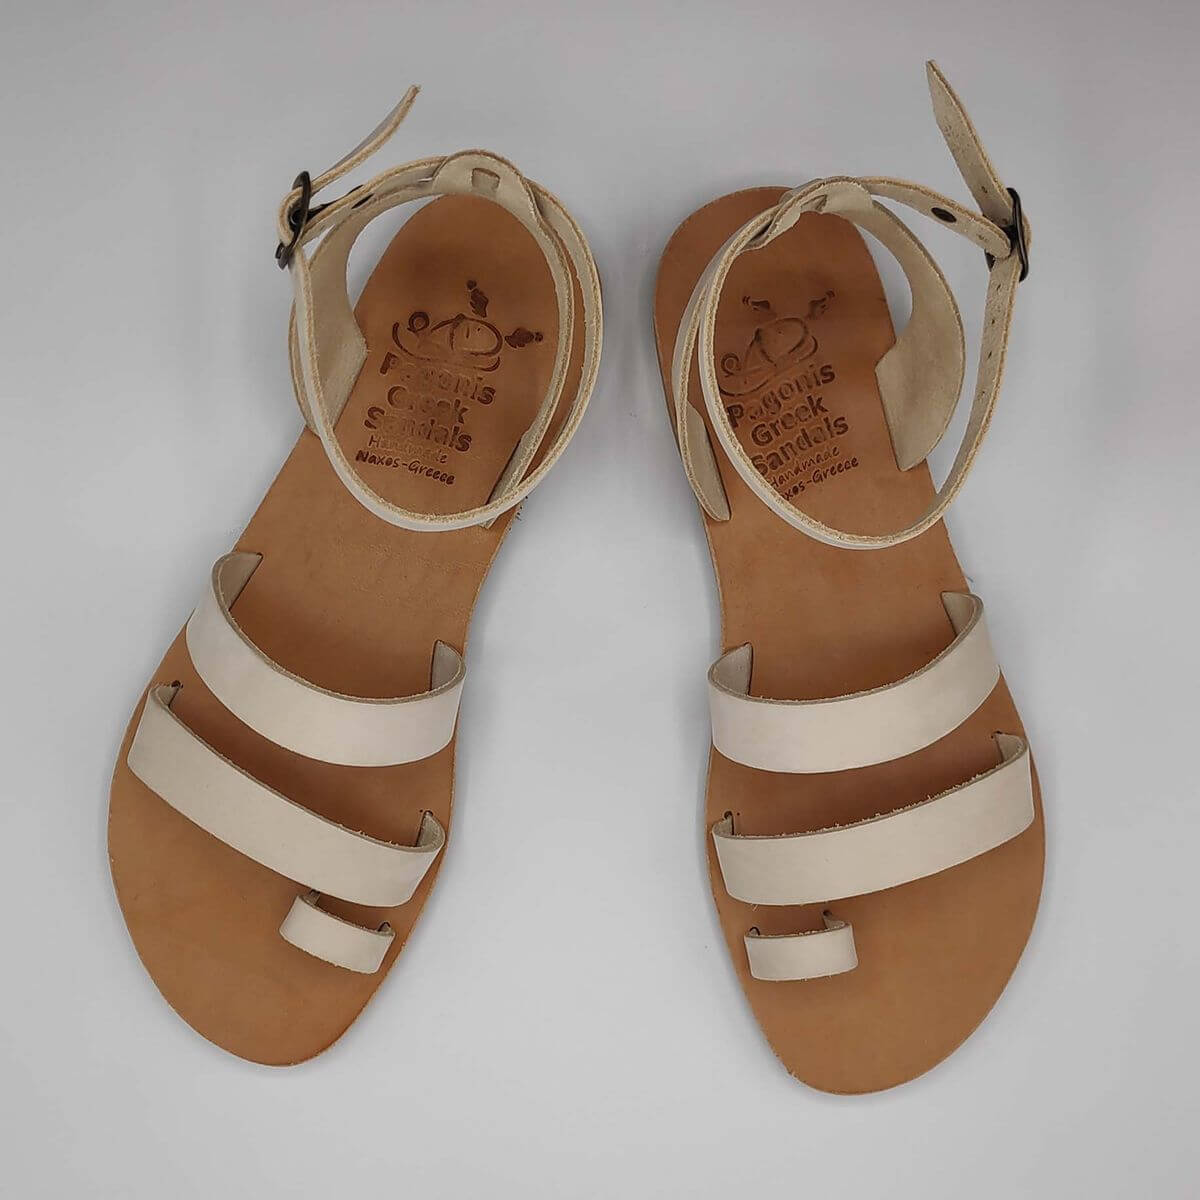 White nubuck leather dressy sandals with two straps, toe ring and high ankle strap, top view